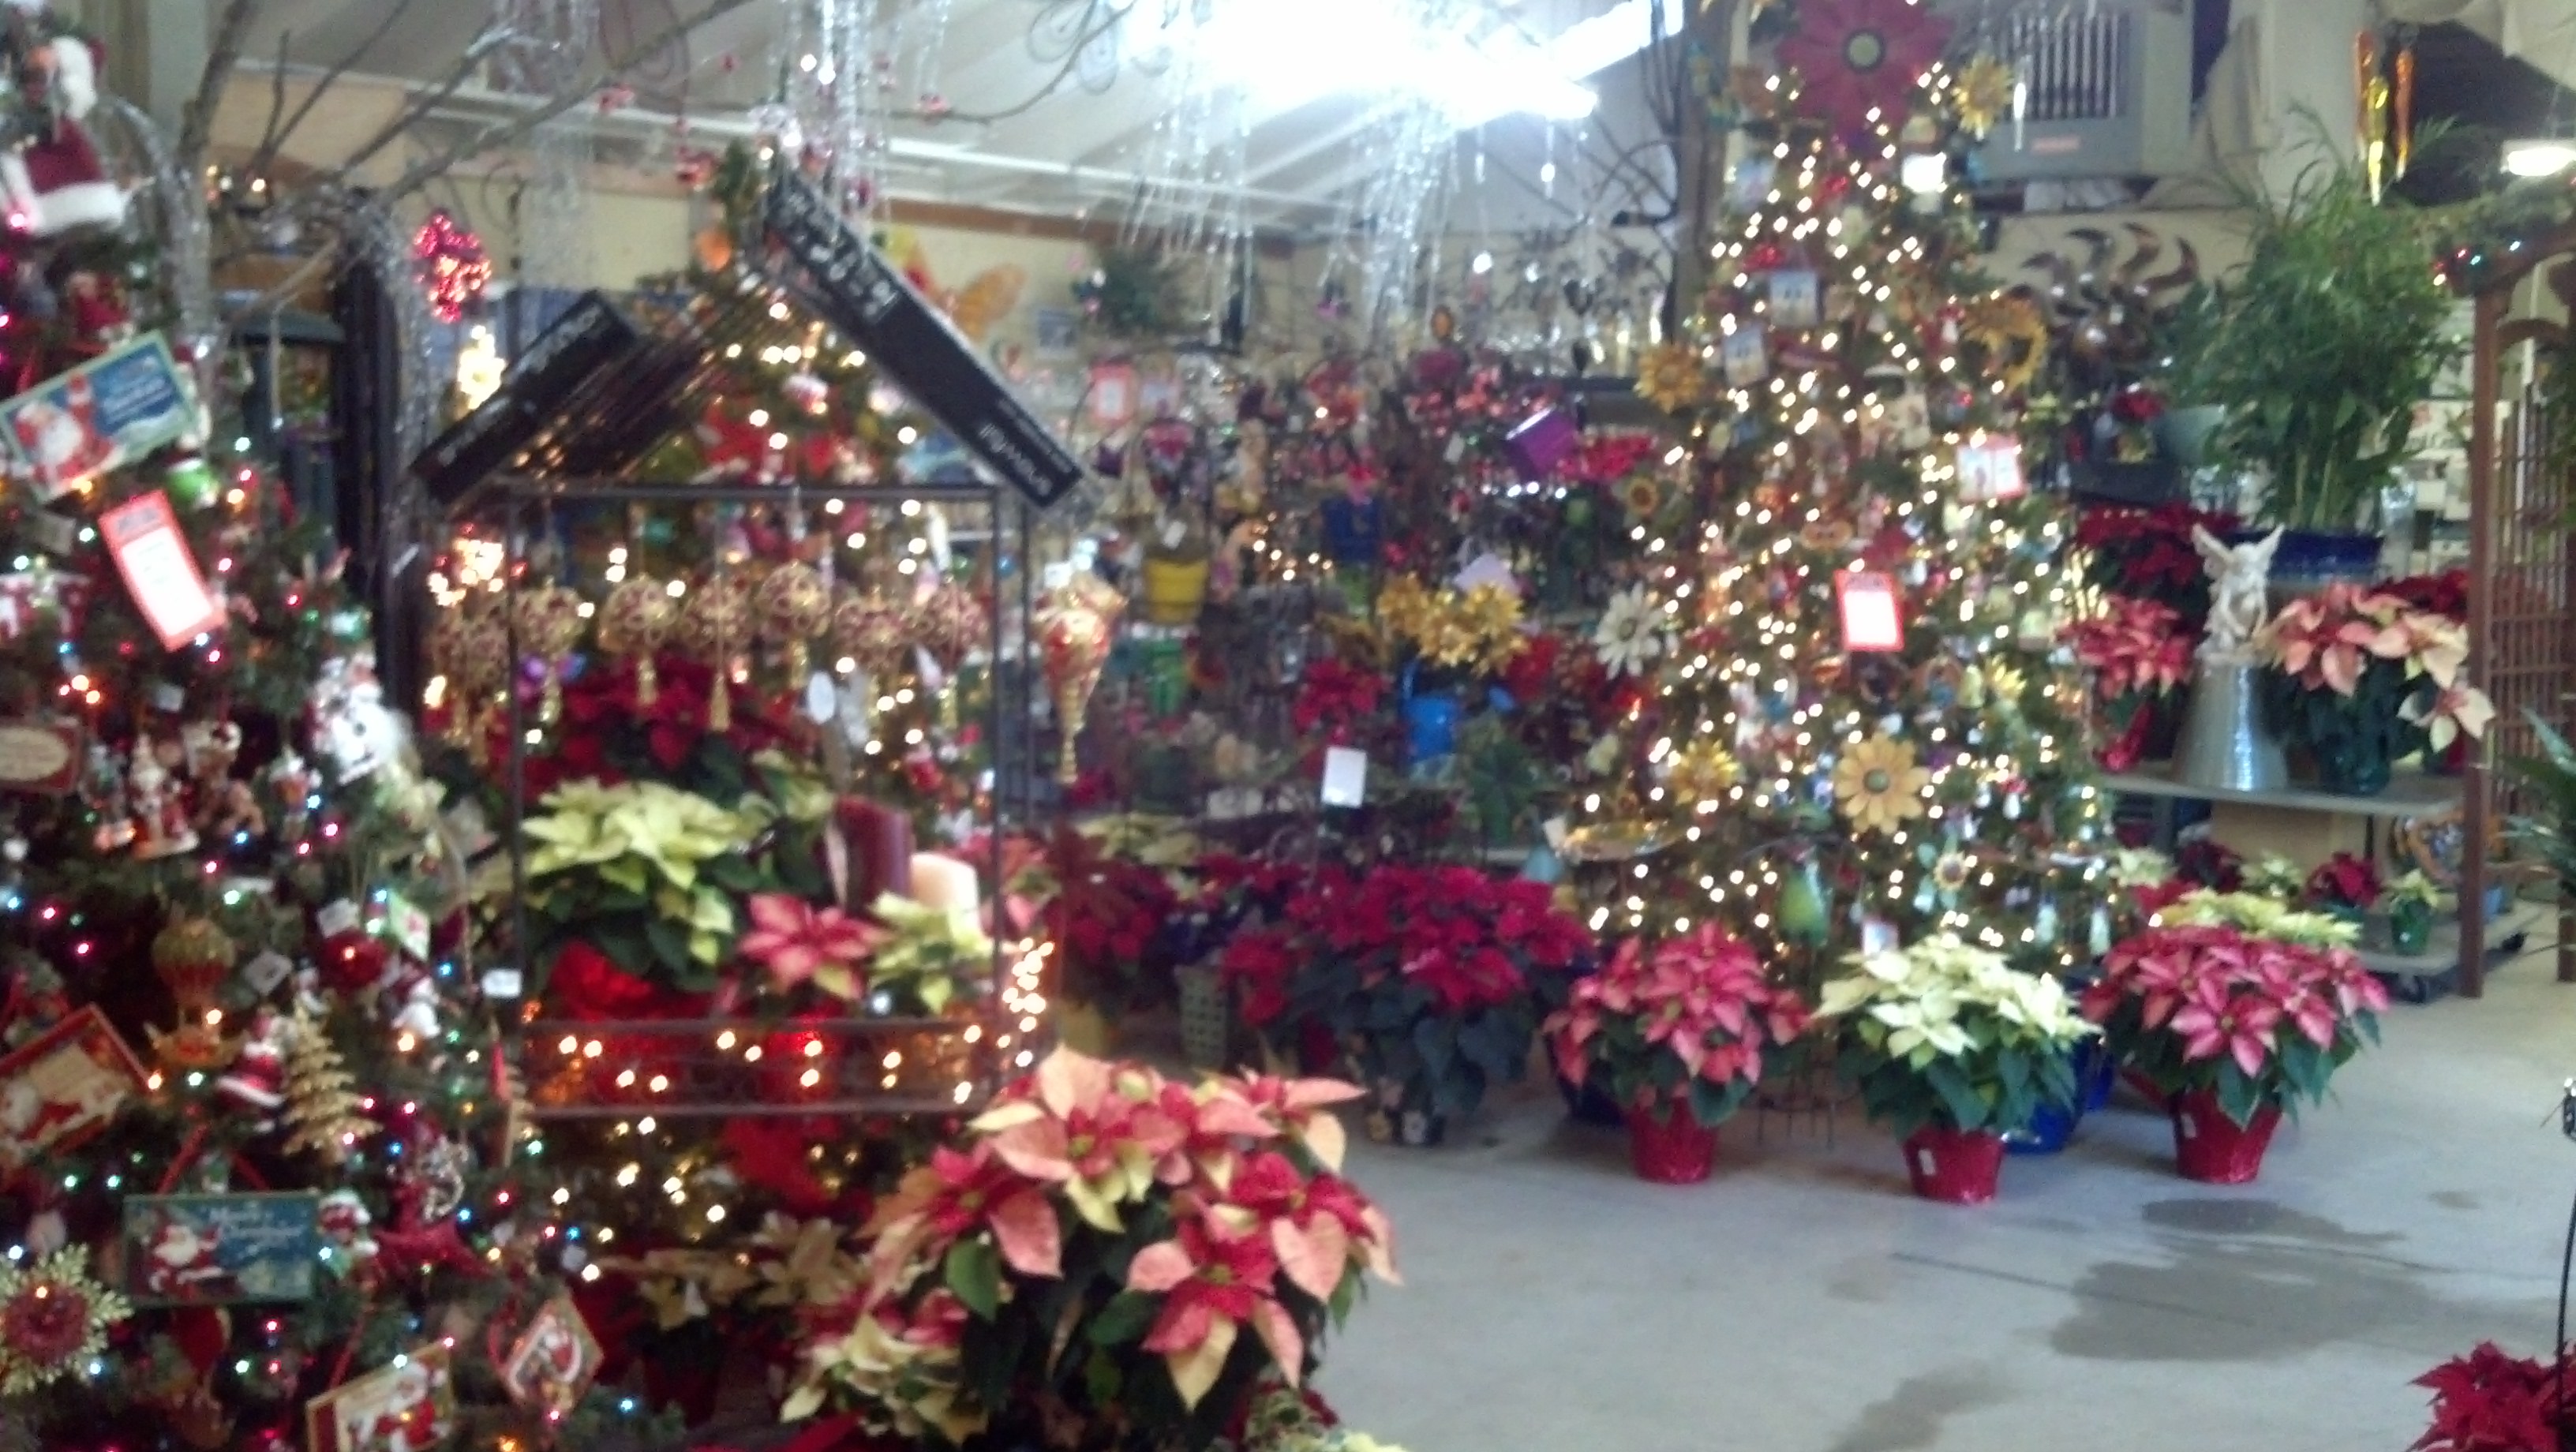 Western Garden Nursery carries a great selection of garden gifts and ...